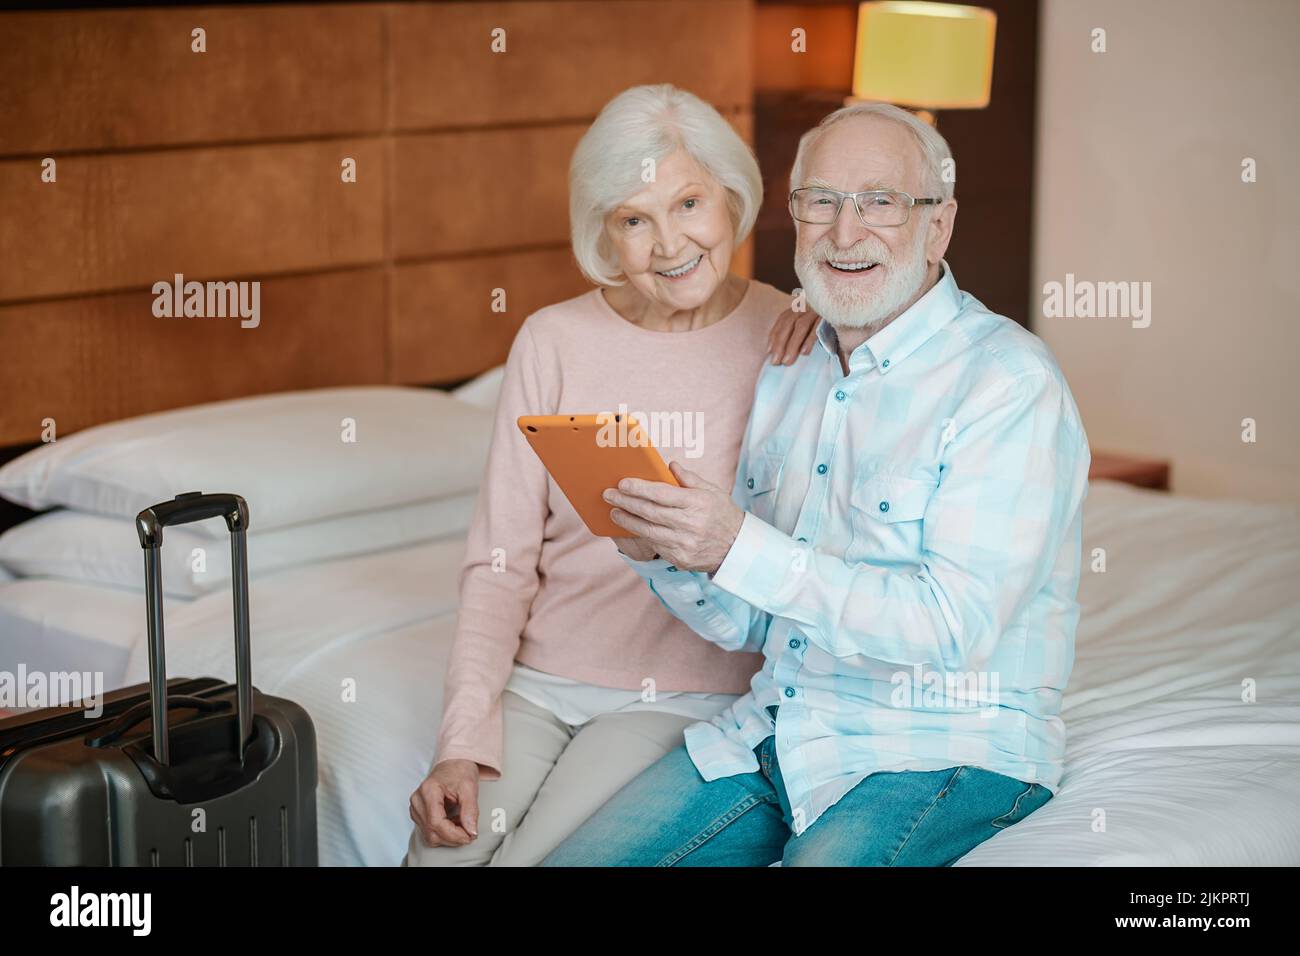 Senior couple sitting on a bed and watching something on a talet Stock Photo